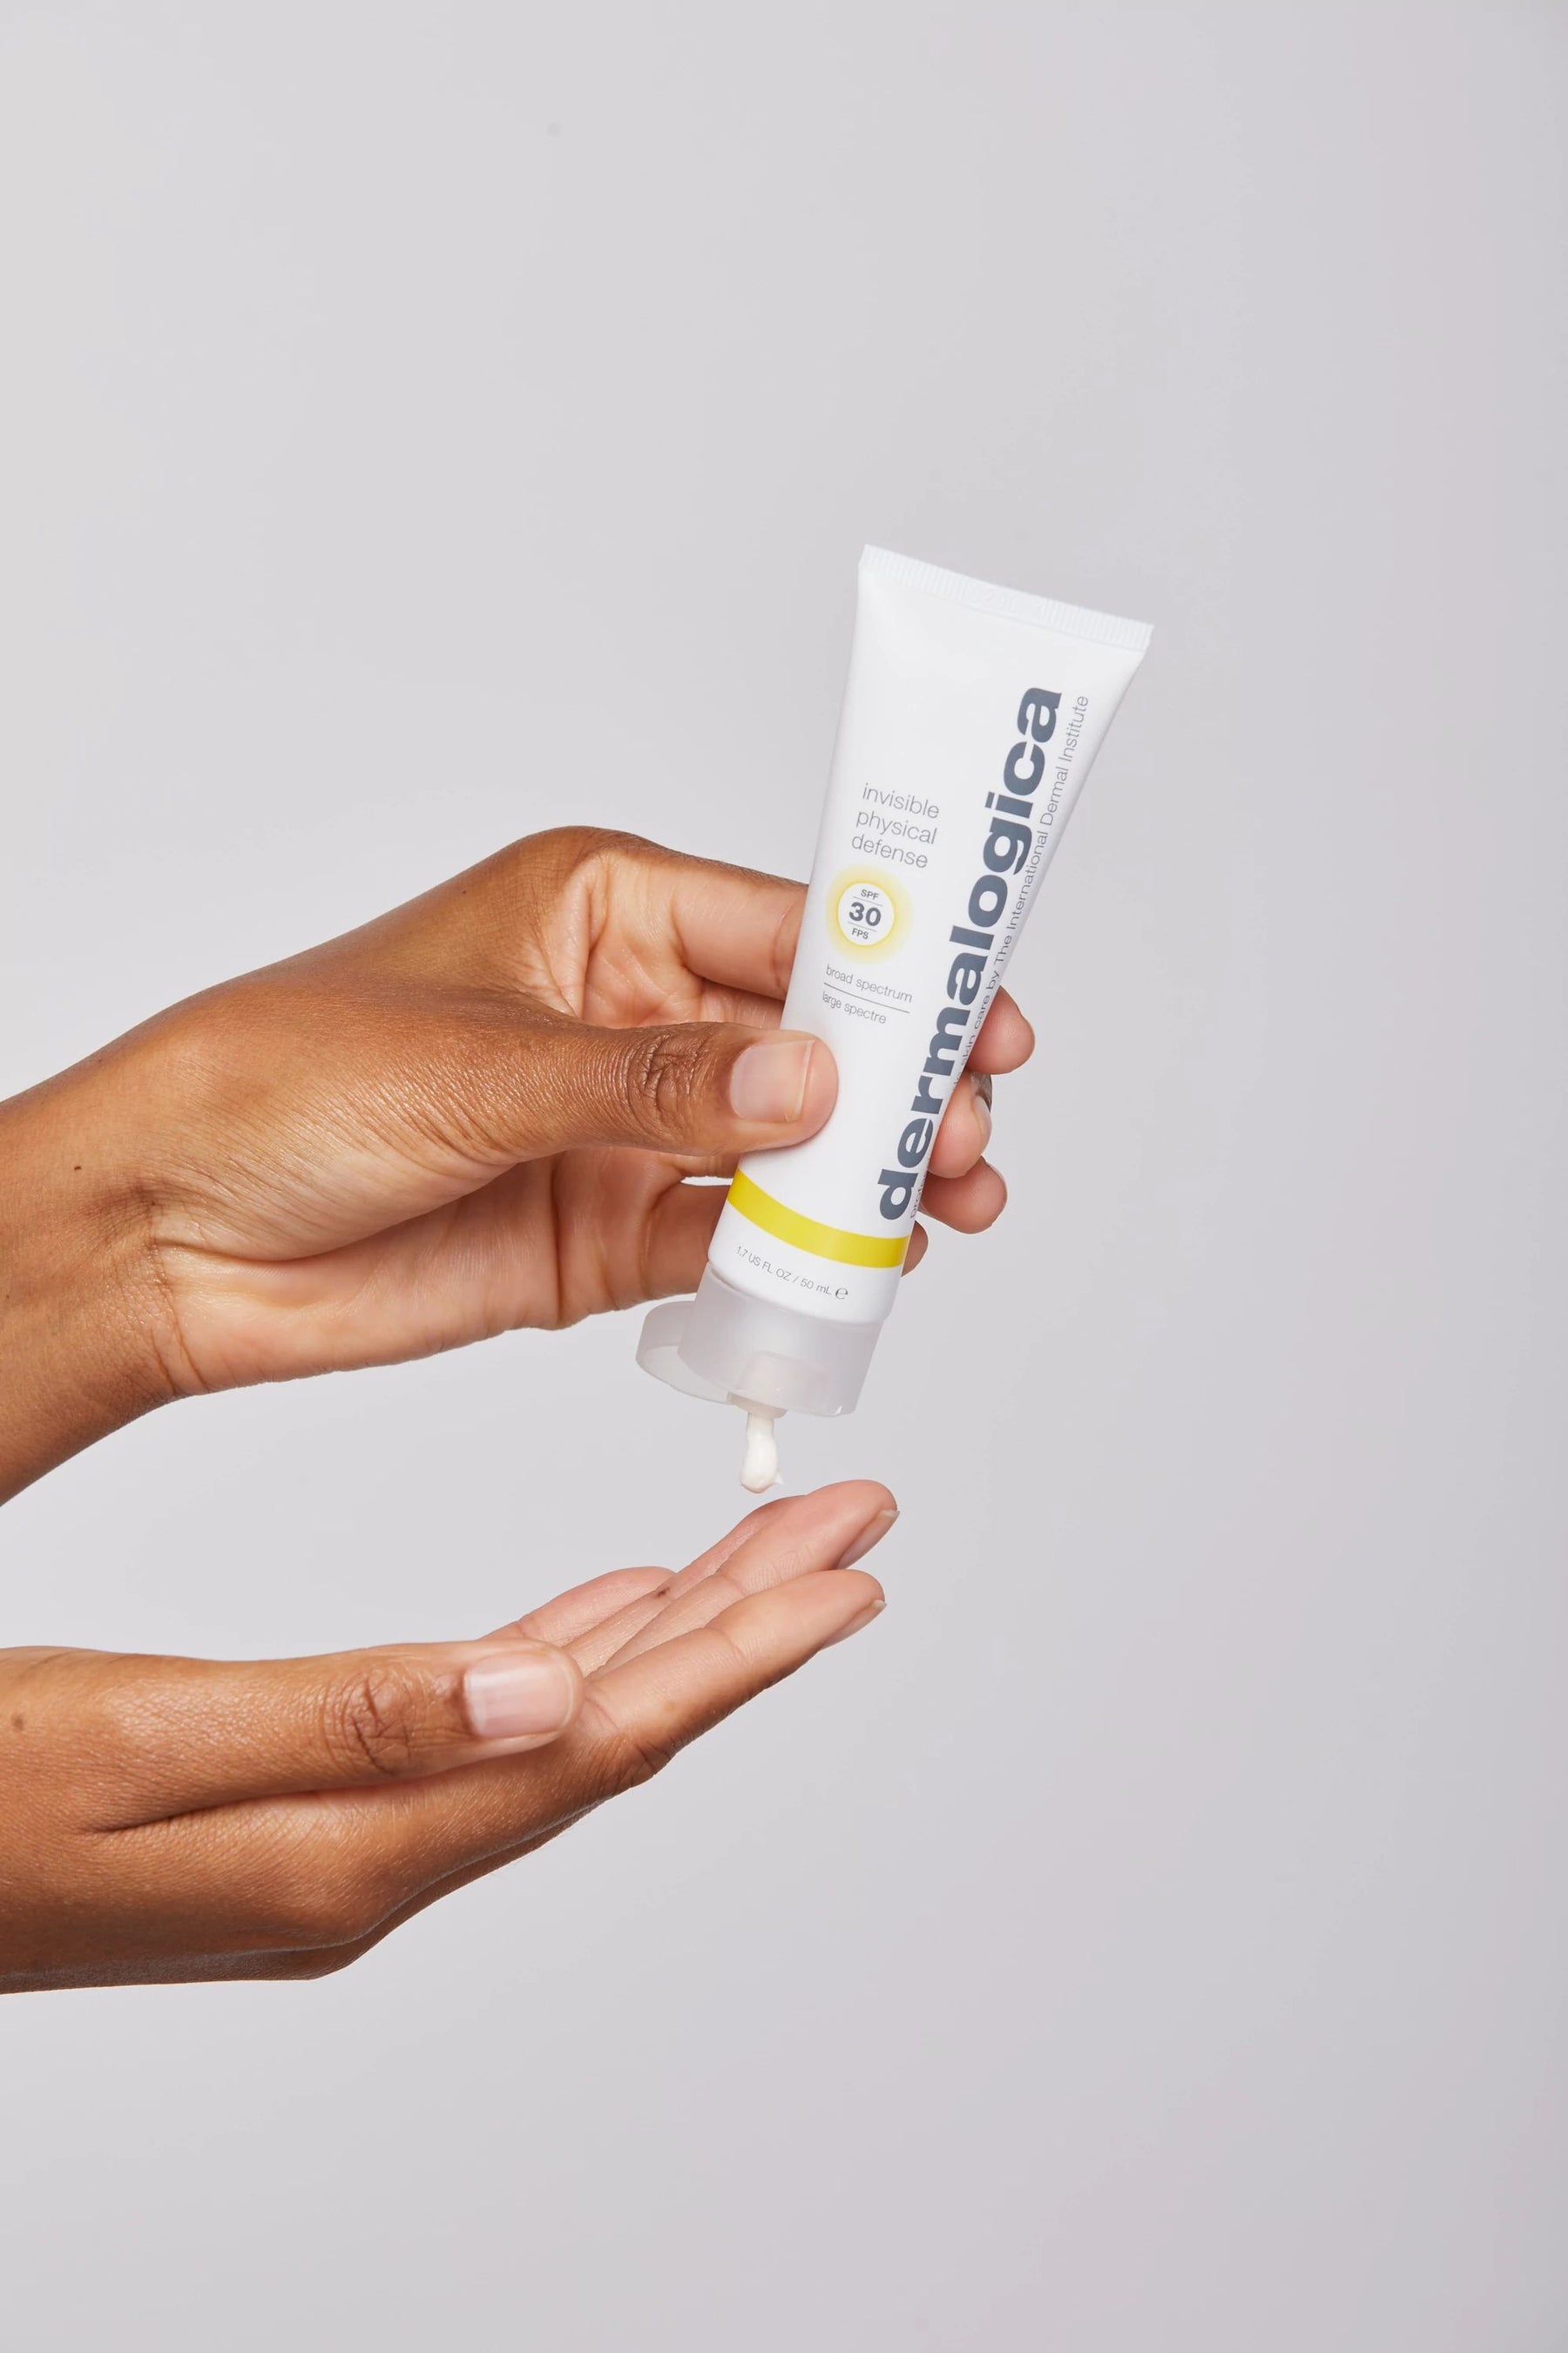 Best Sunscreen for Oily Skin, Dermalogica India